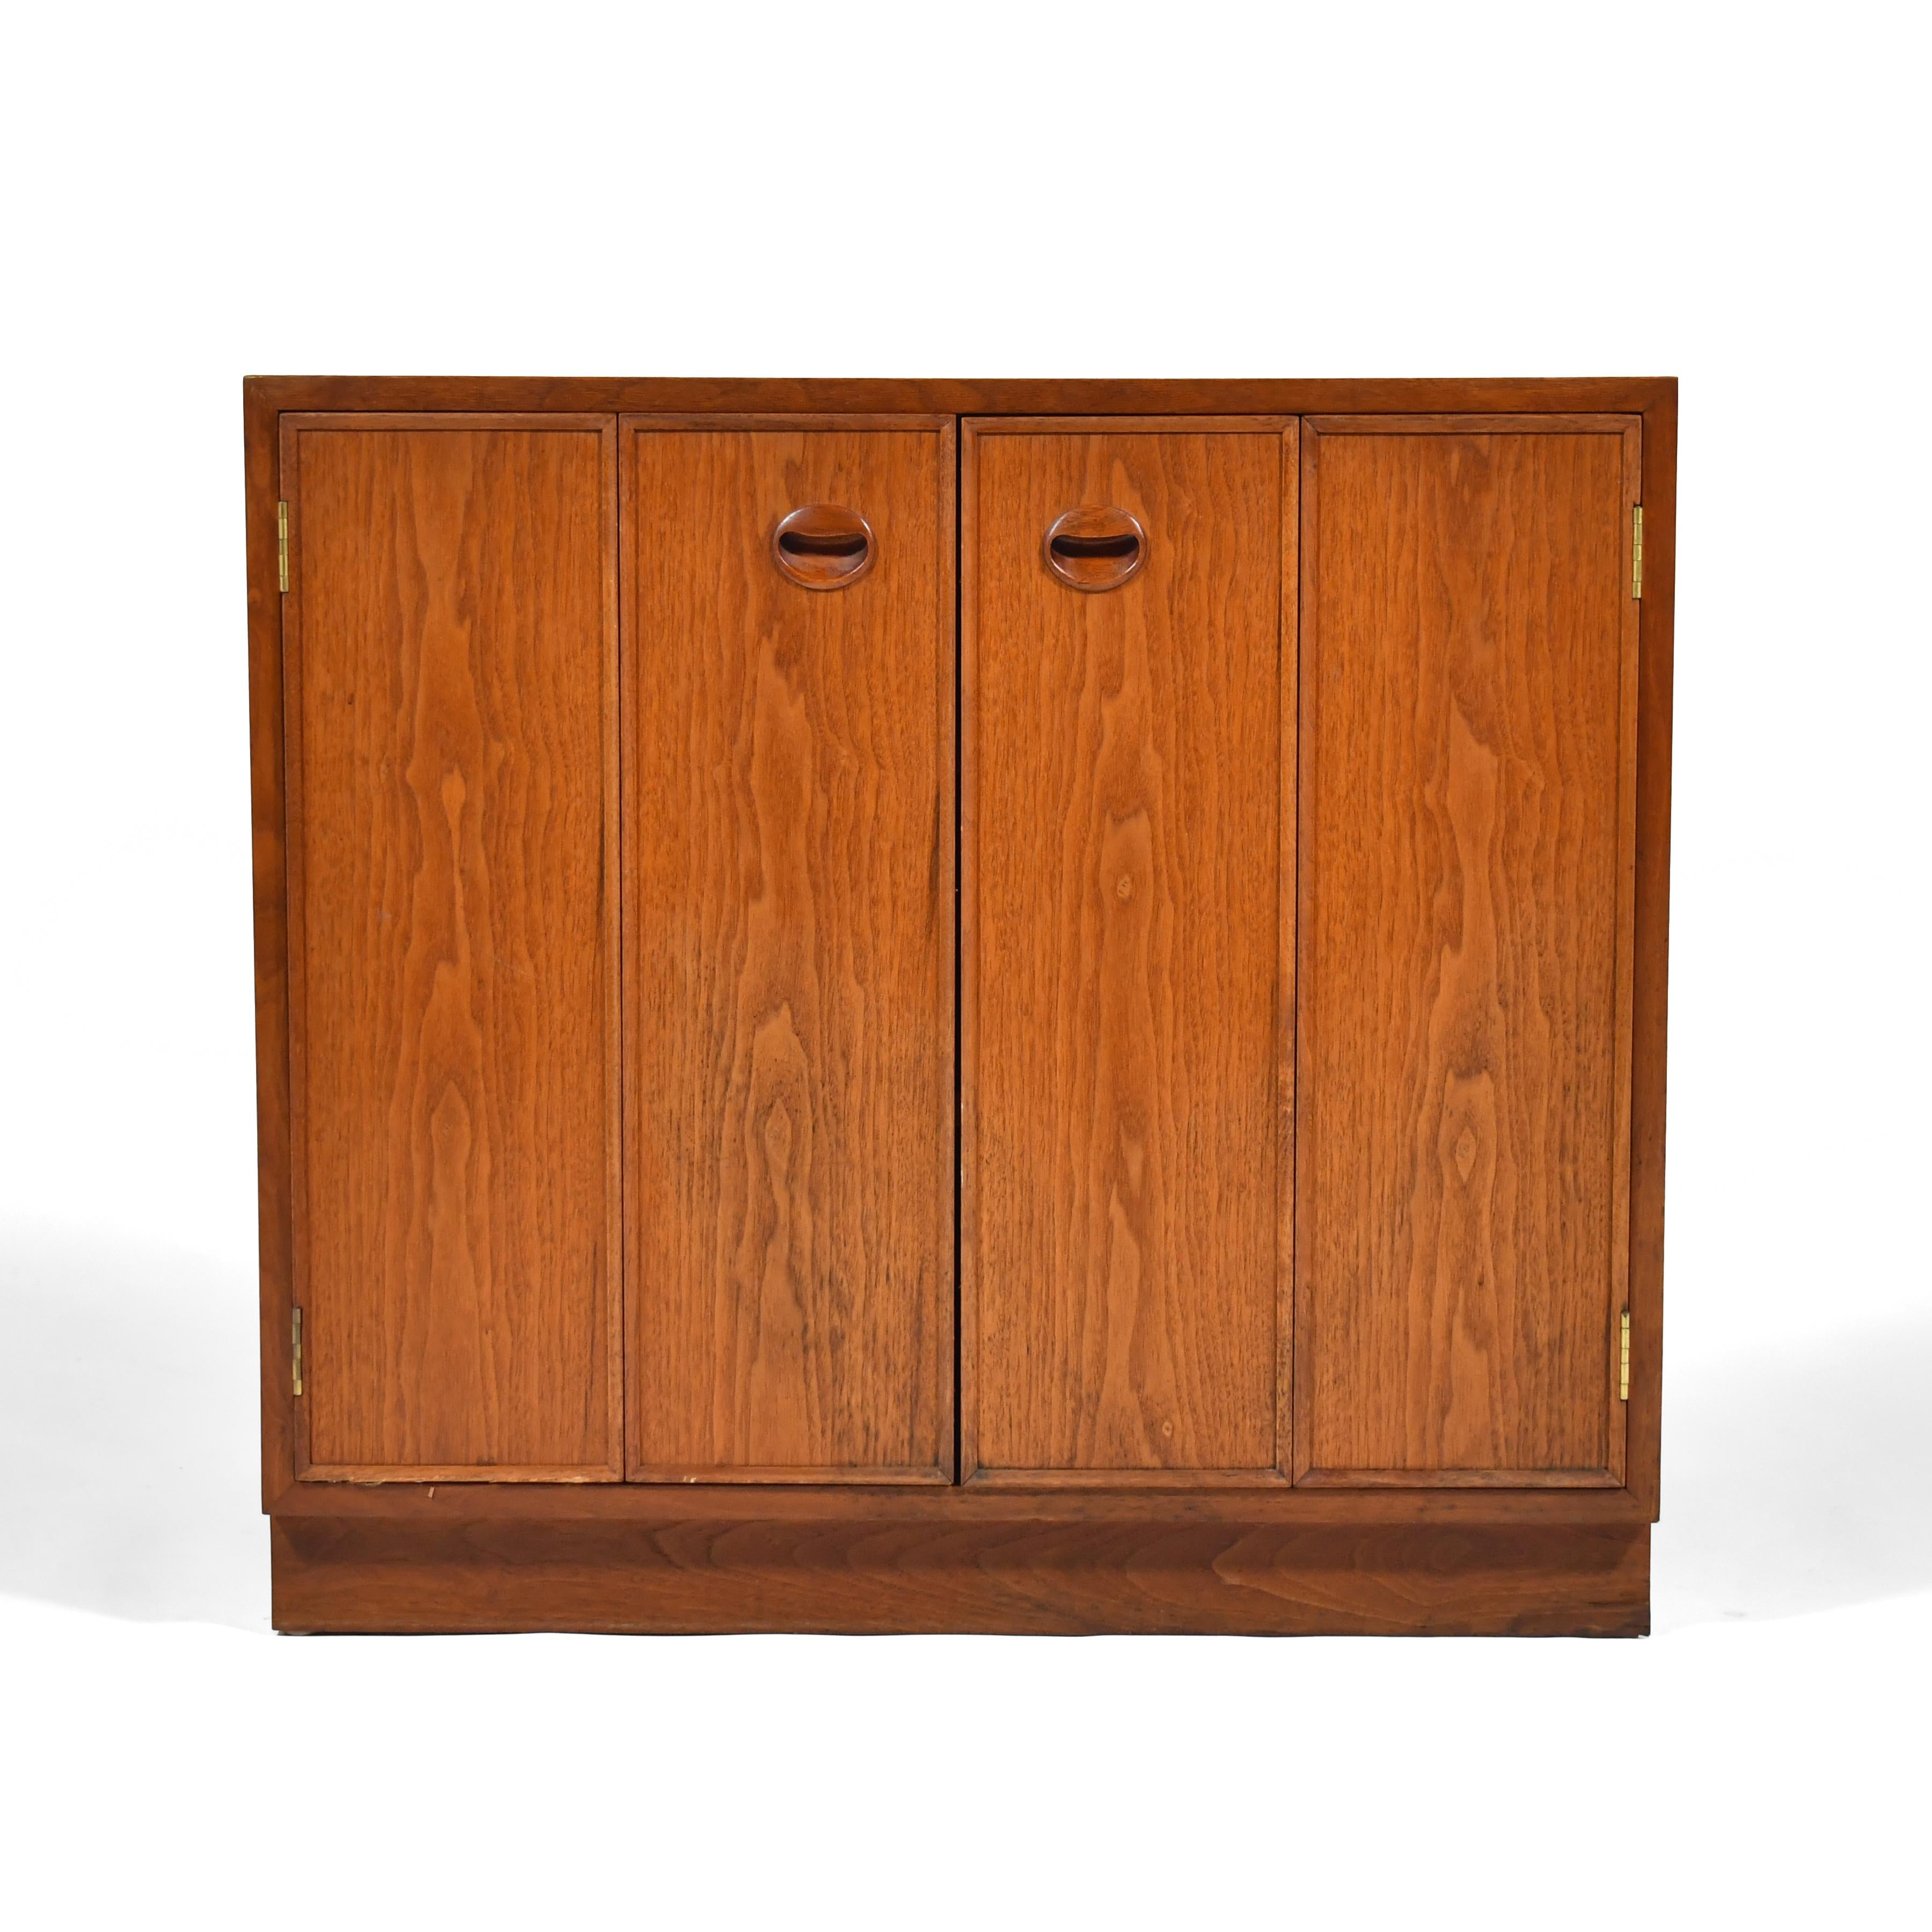 Simple, clean-lined and versatile, this Ed Wormley cabinet by Dunbar features two bi-fold doors concealing one compartment with two shelves. Subtle details include the beautifully figured walnut grain, brass piano hinges in the doors, and the